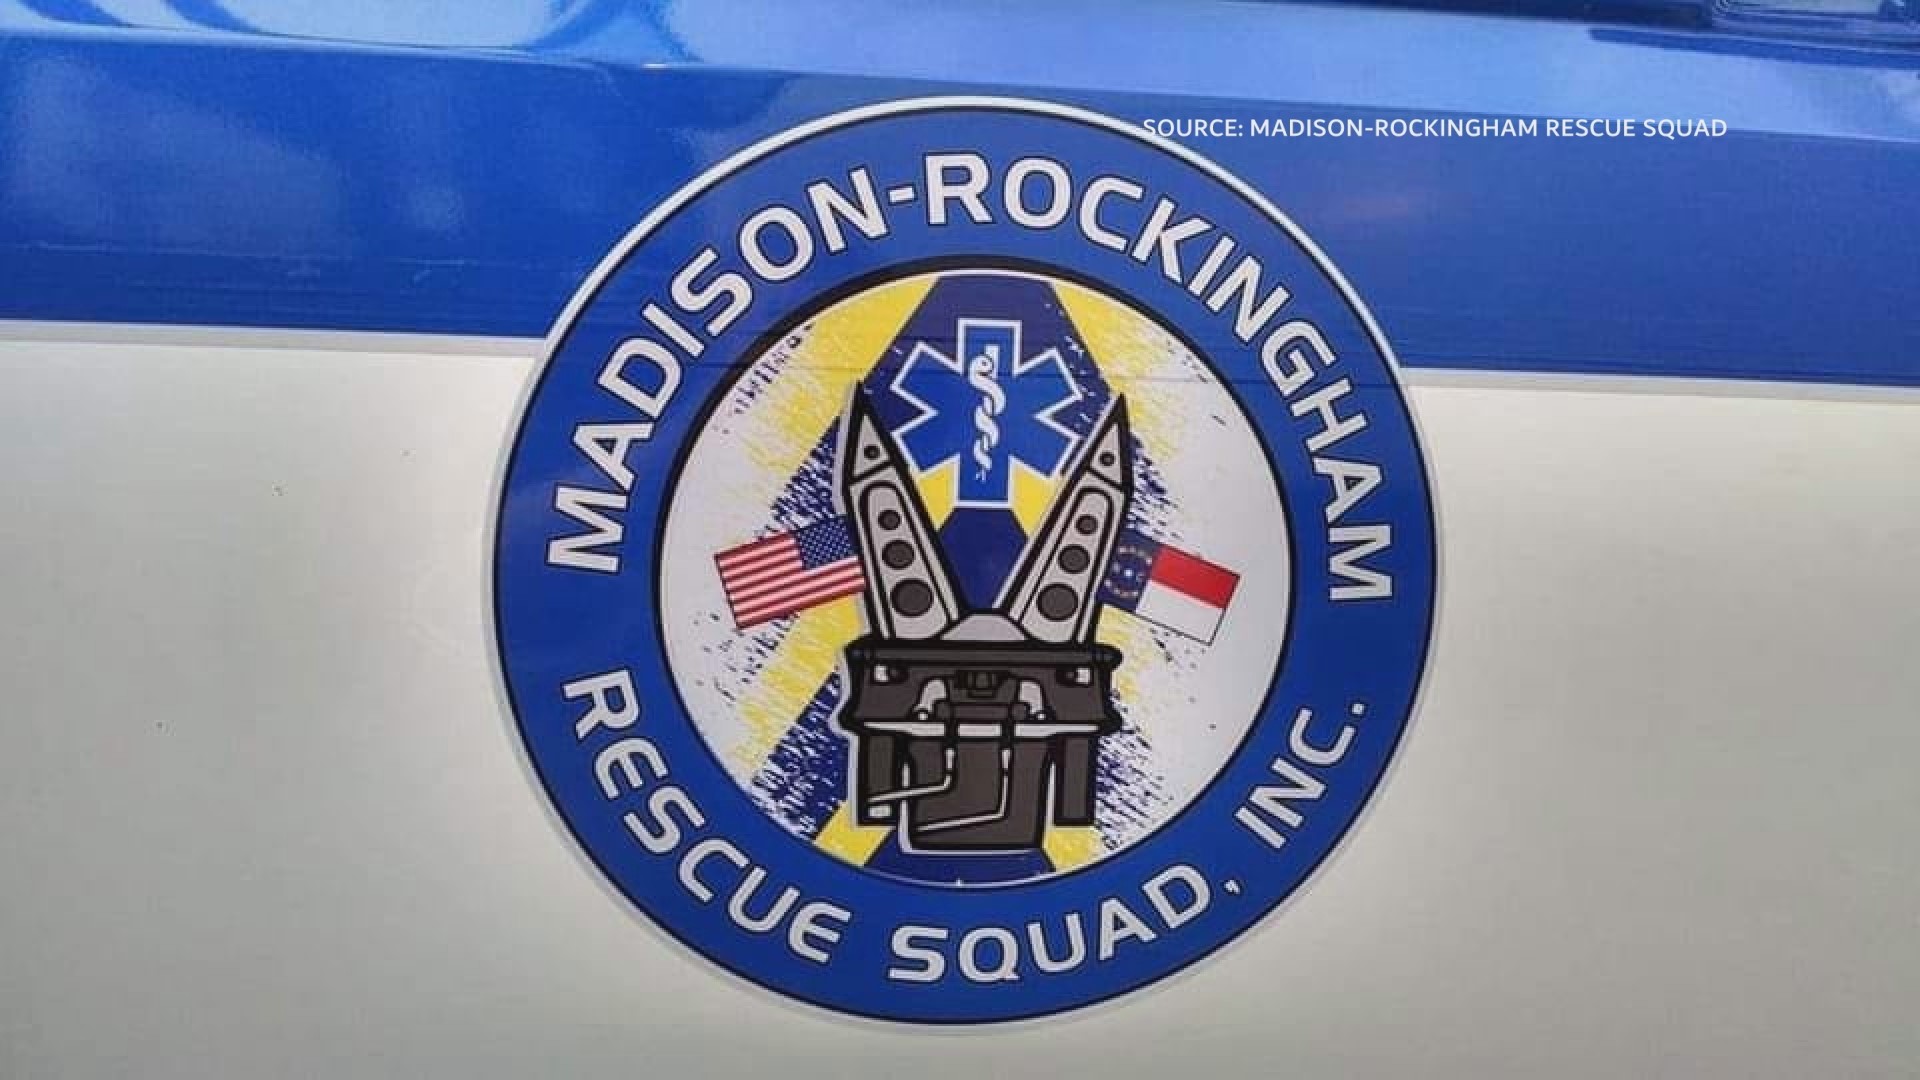 The Madison-Rockingham Rescue Squad must now answer the county before heading out for calls.